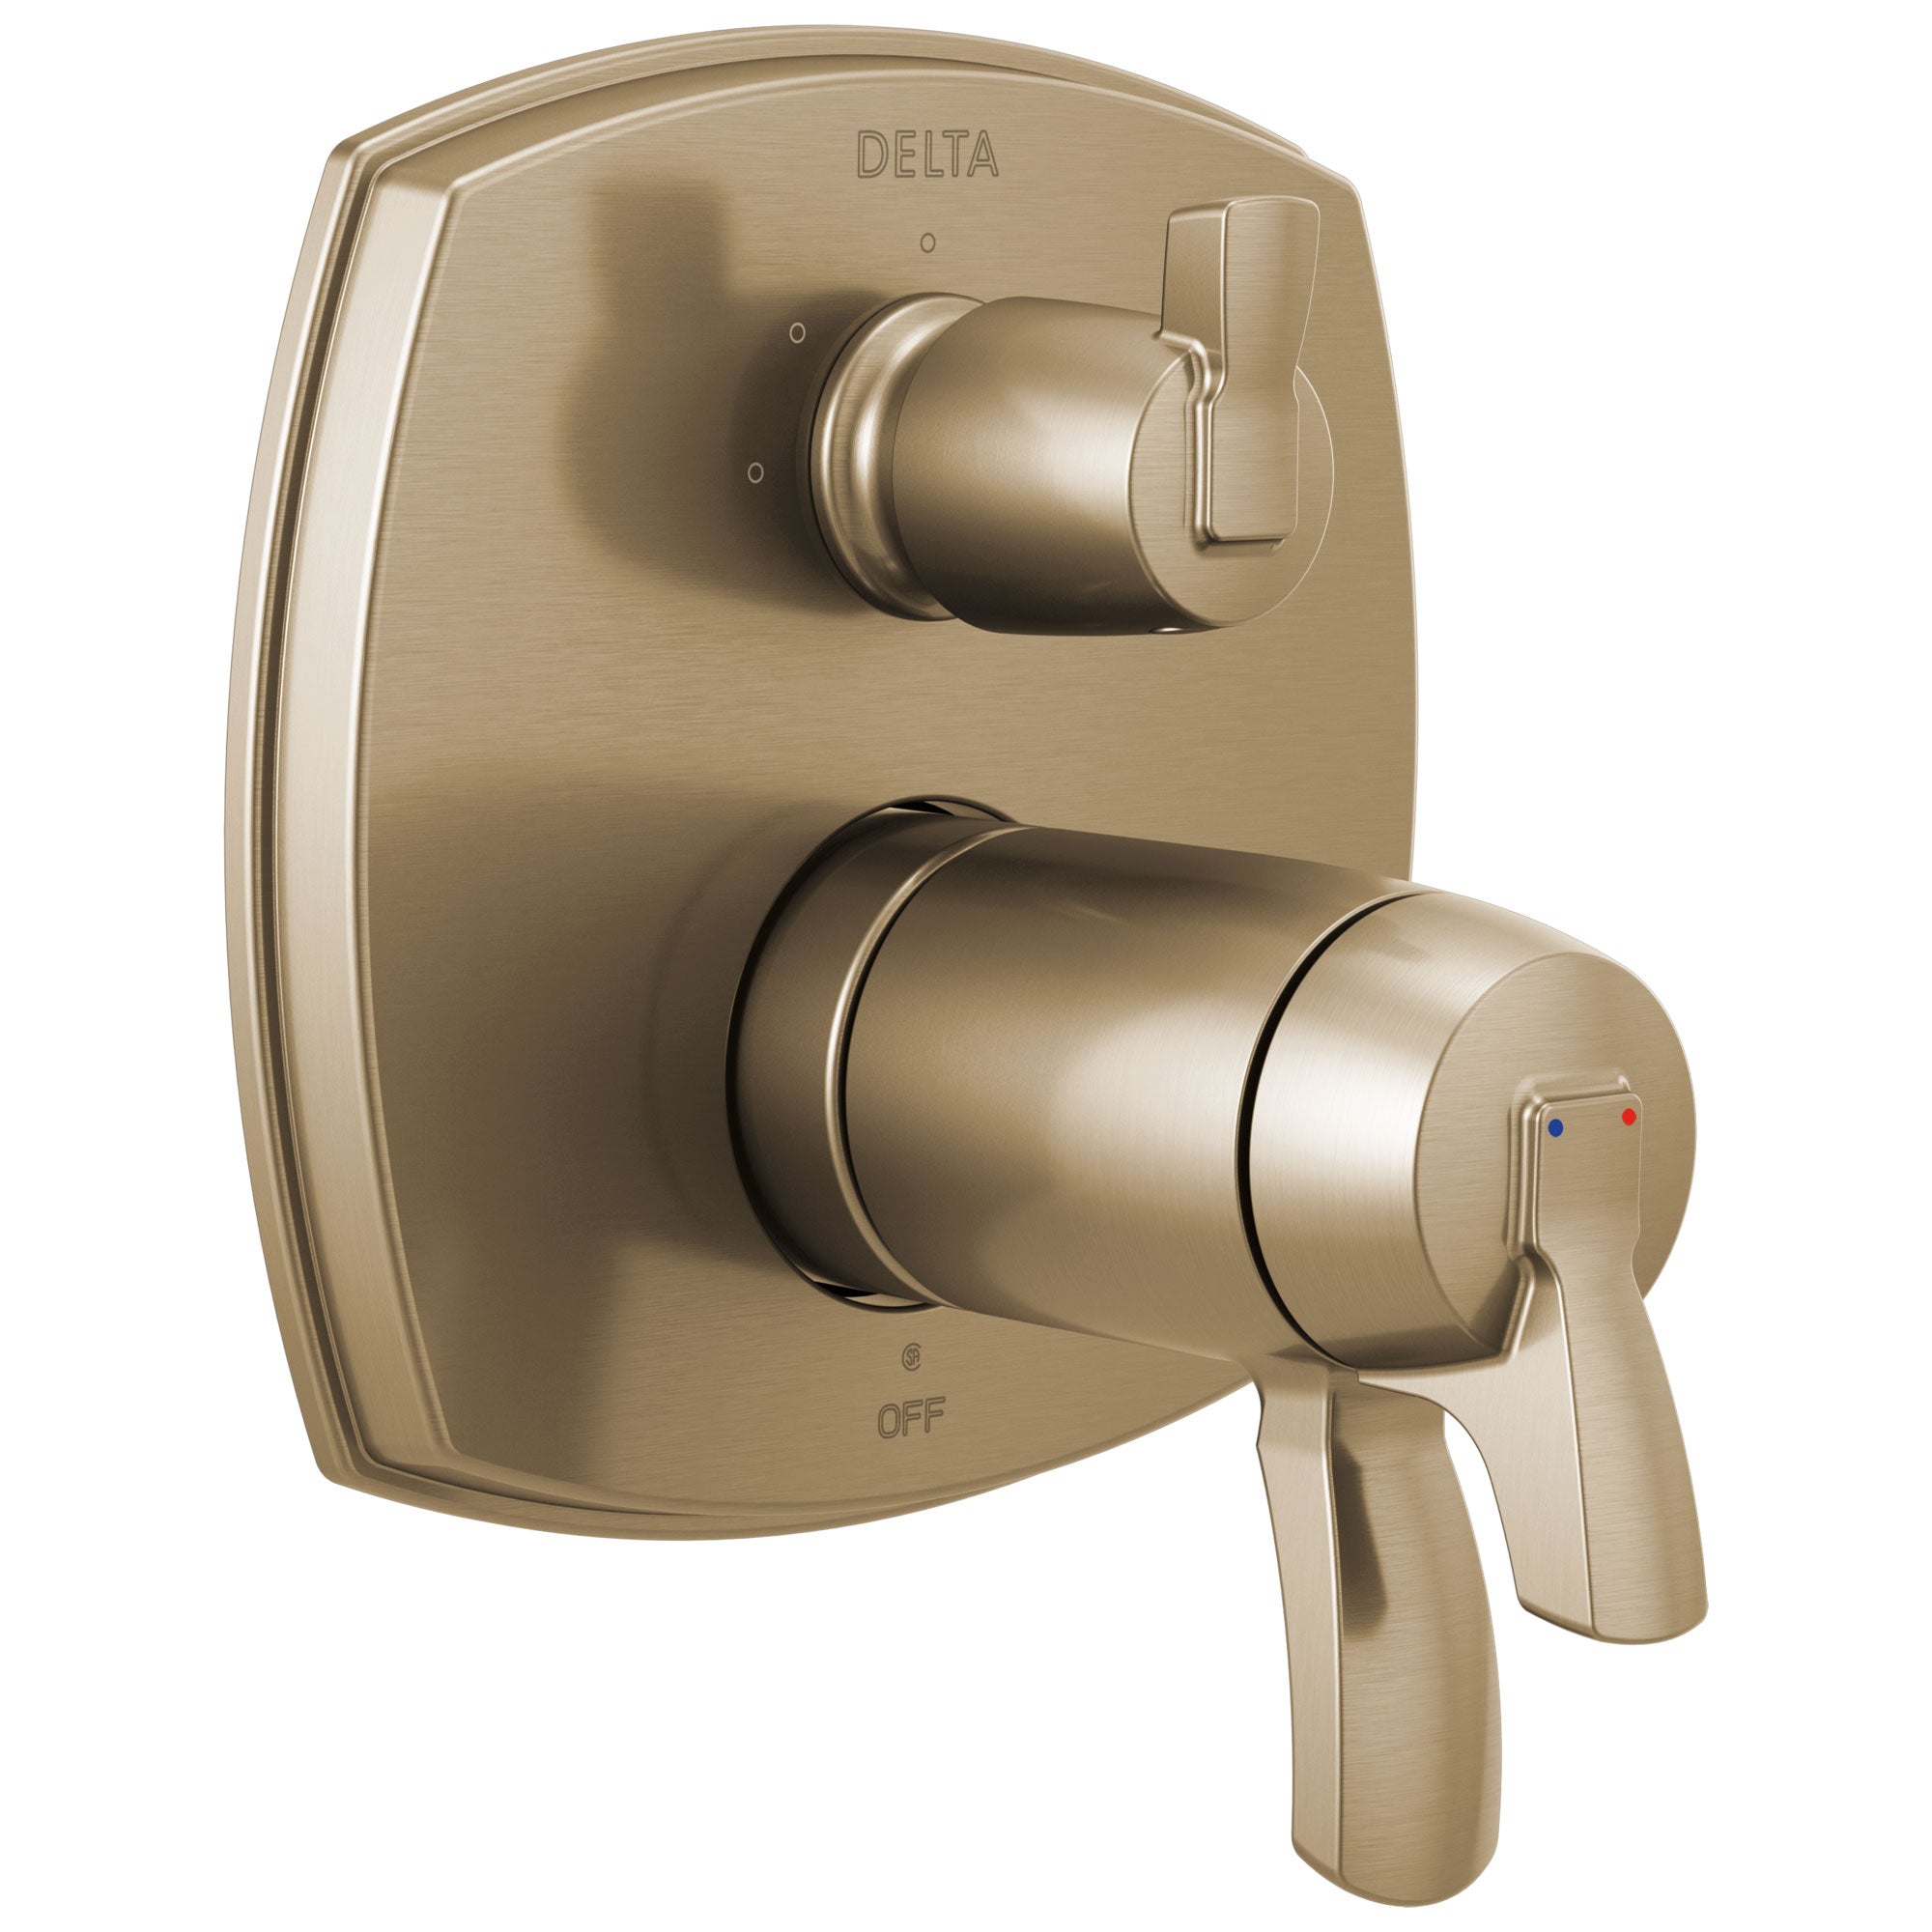 Delta Stryke Champagne Bronze Finish 3-setting Integrated Lever Handle Diverter Thermostatic Shower System Control Includes Valve and Handles D3100V